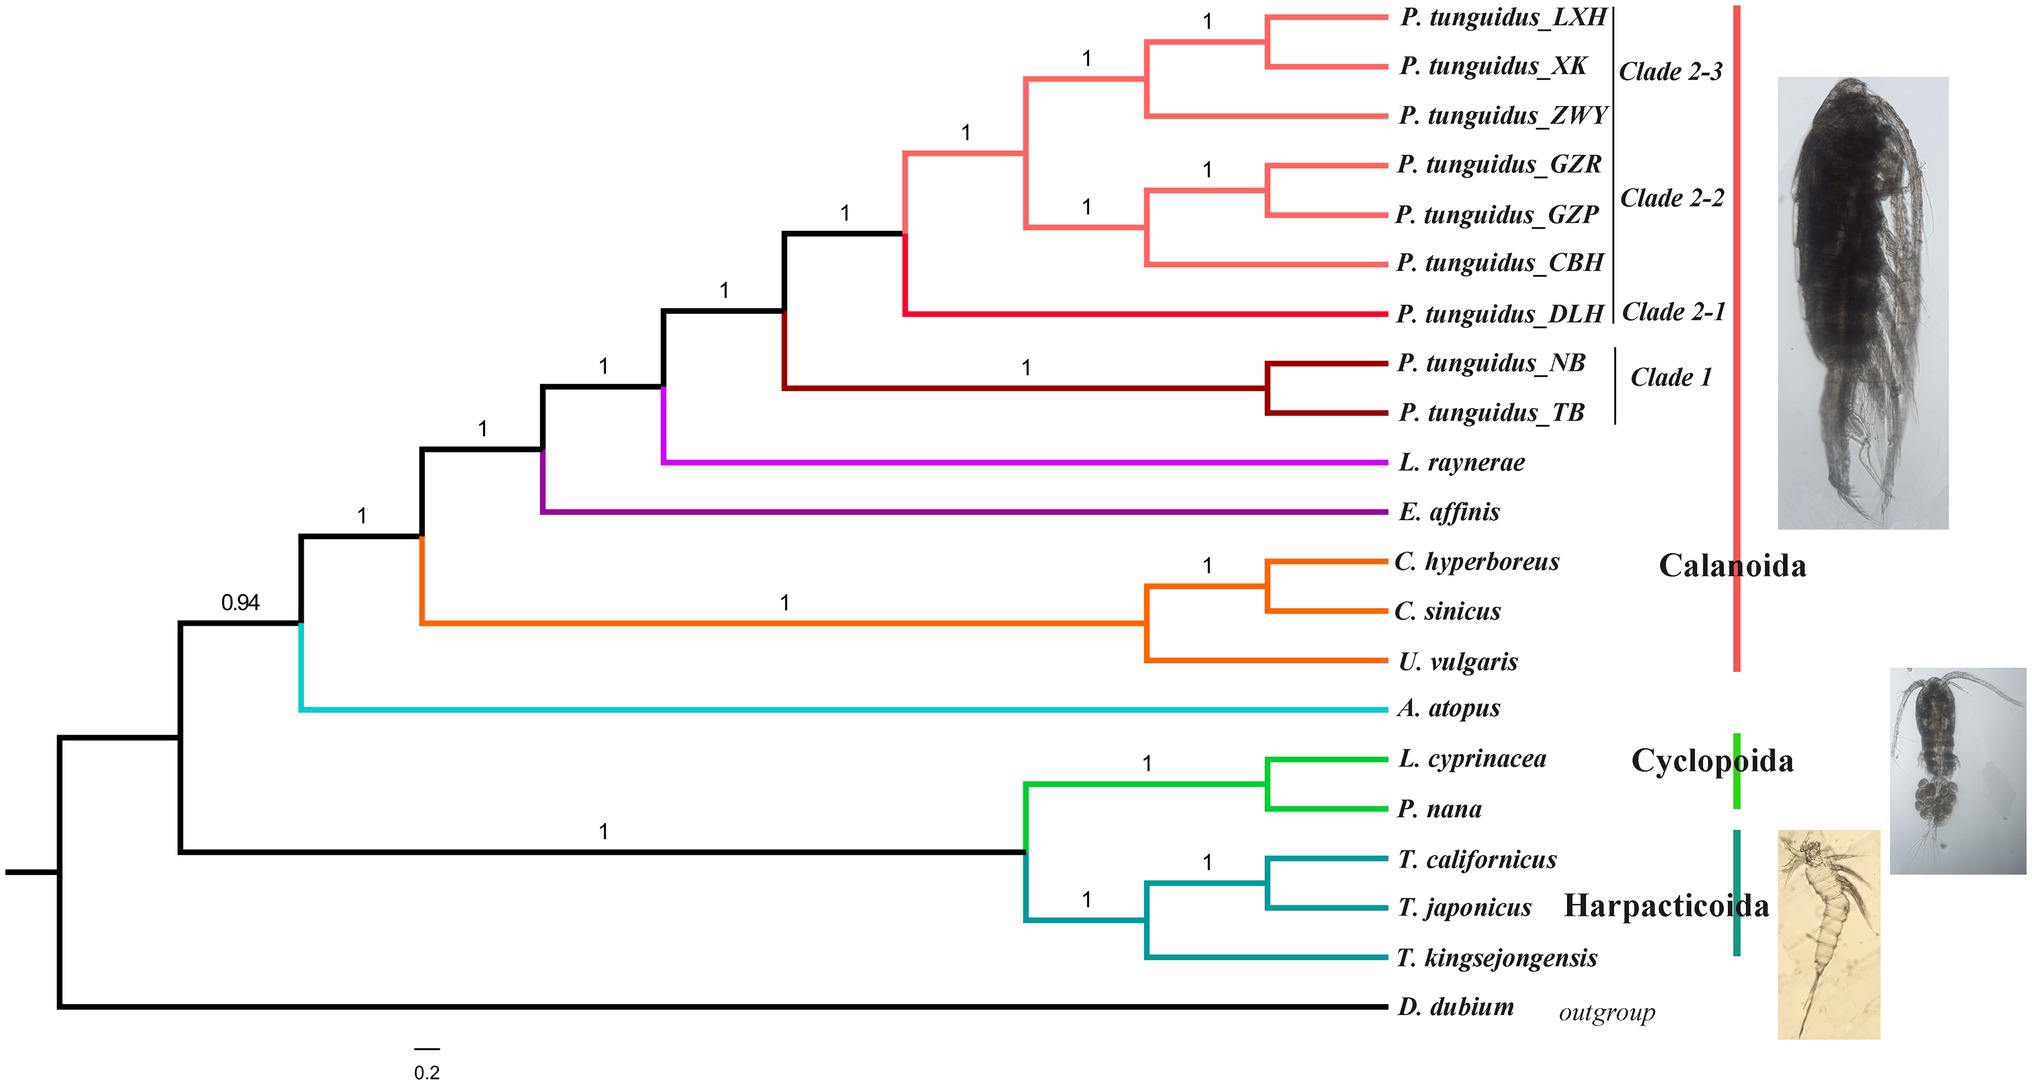 Frontiers | Geographic Variation of Phyllodiaptomus tunguidus 